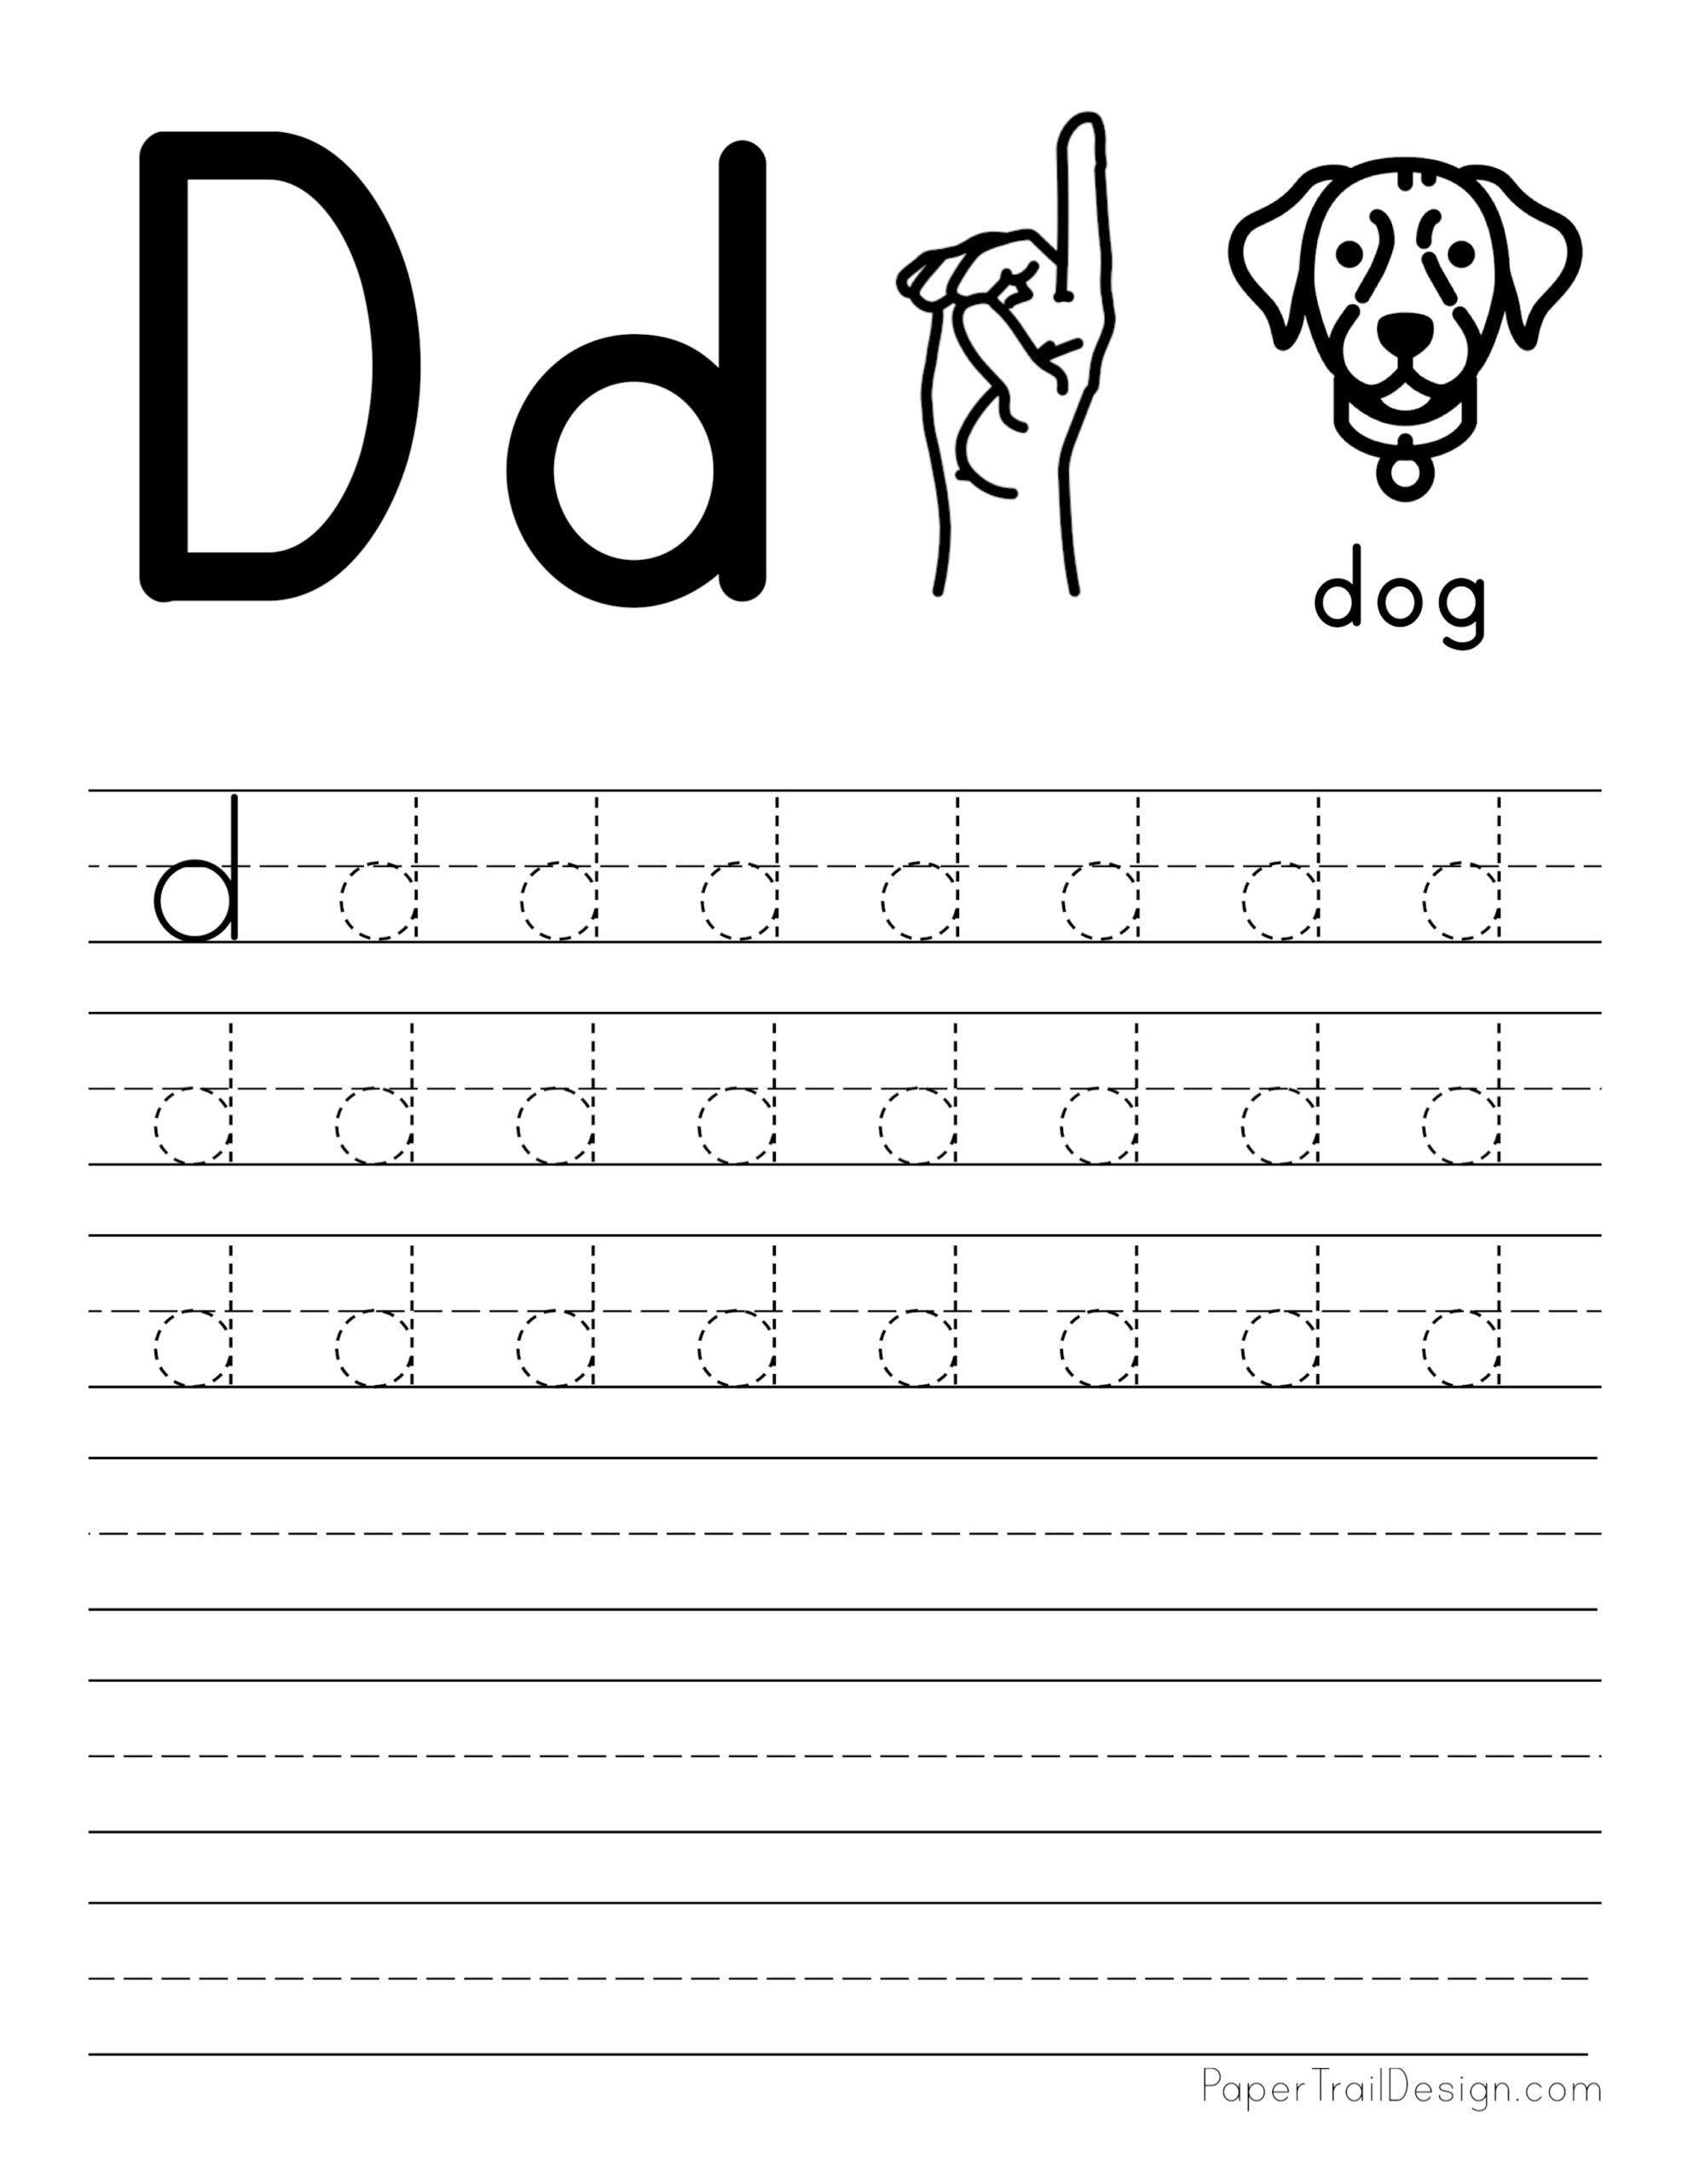 free letter tracing worksheets paper trail design